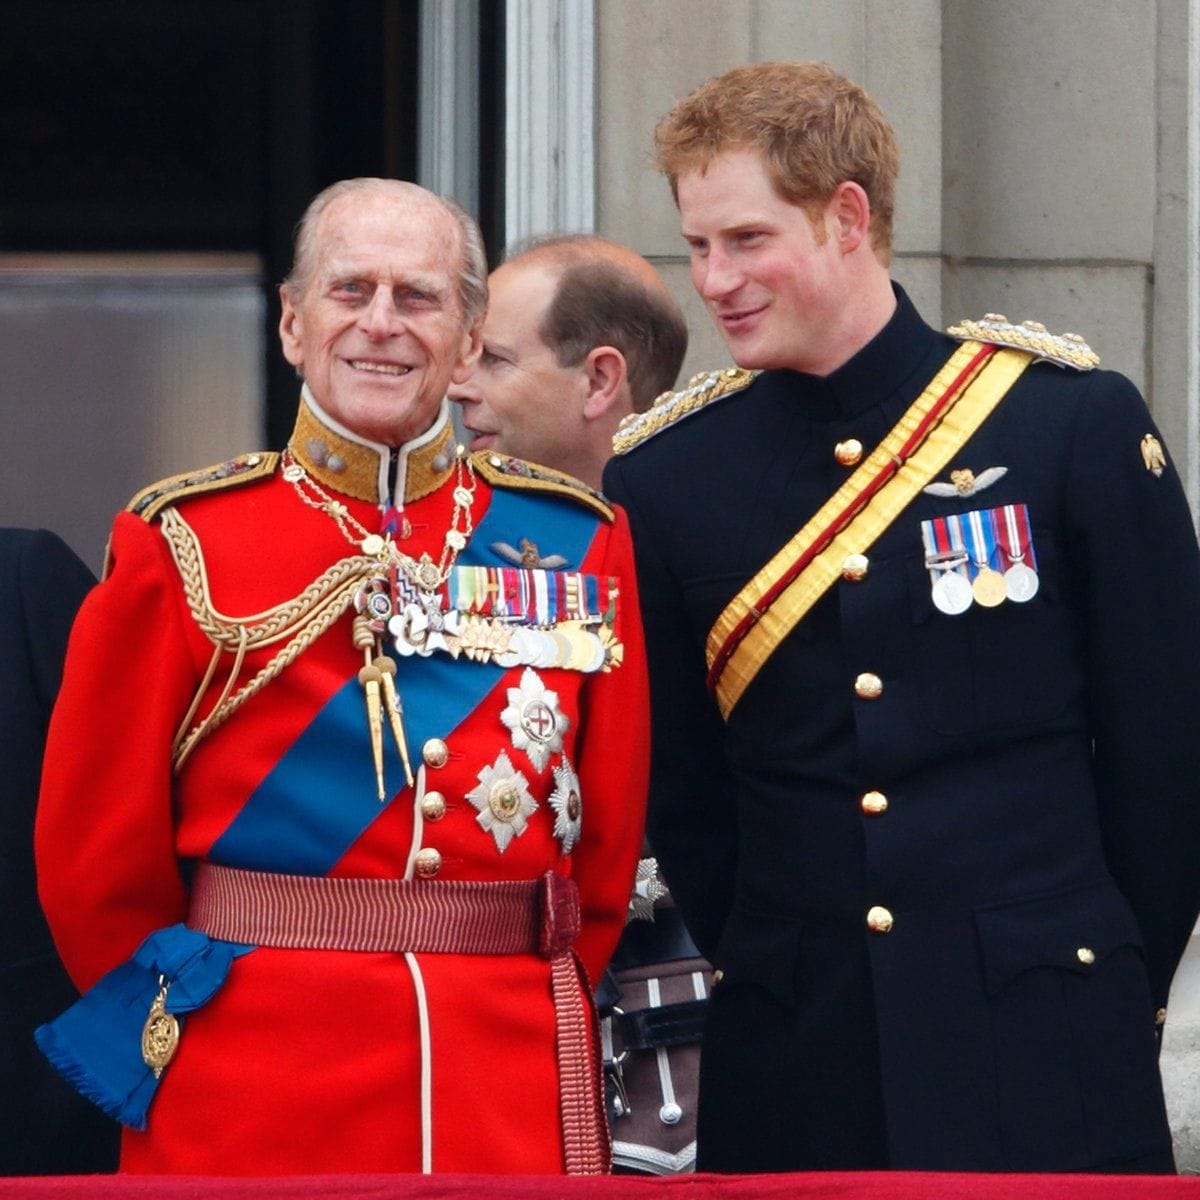 Prince Harry remembered his grandfather Prince Philip as a master of the barbecue